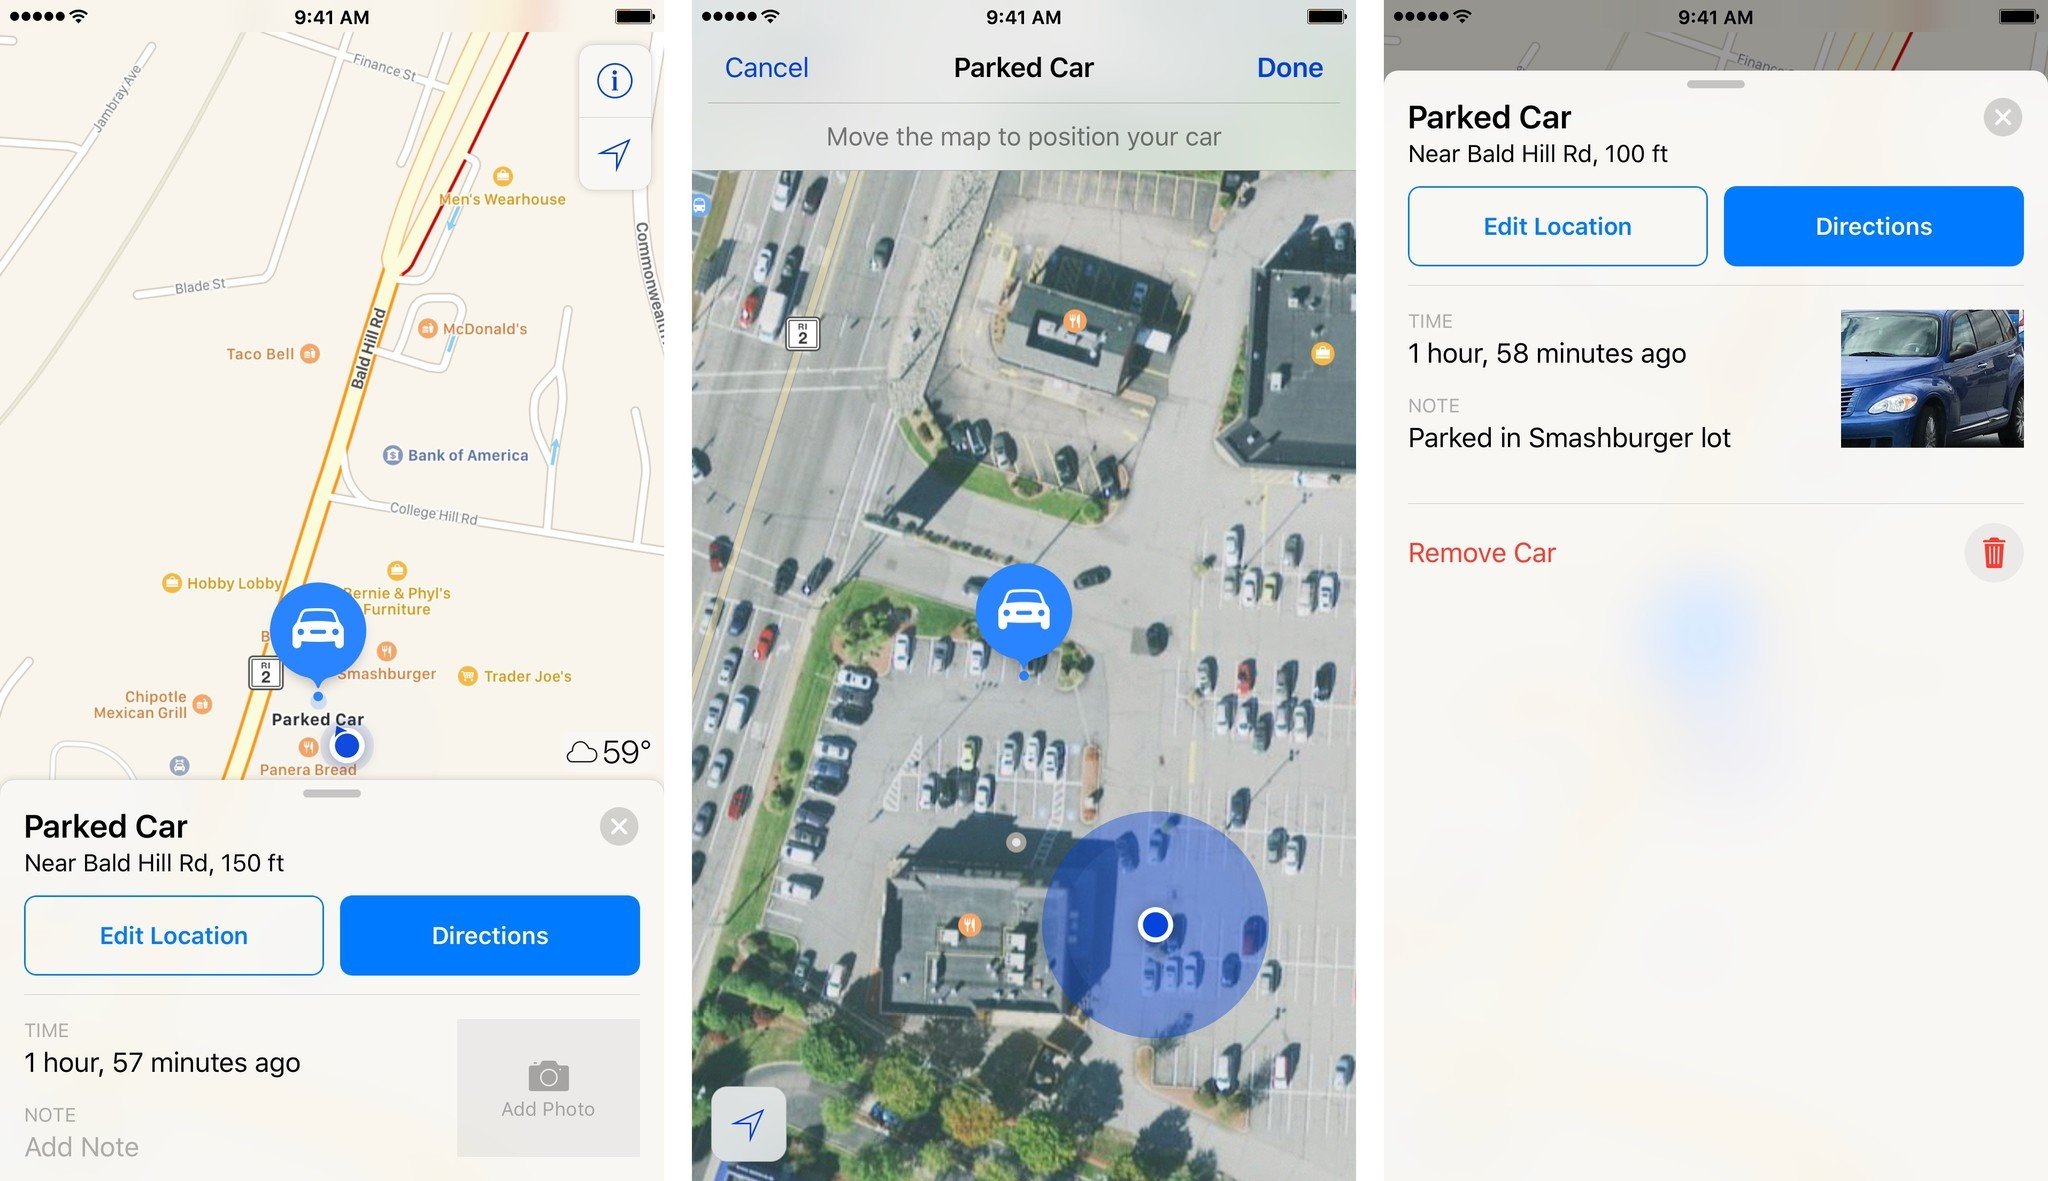 To add information about your parked car location, tap the Parked Car marker, then tap Note or Photo field to add textual or photographic information. 